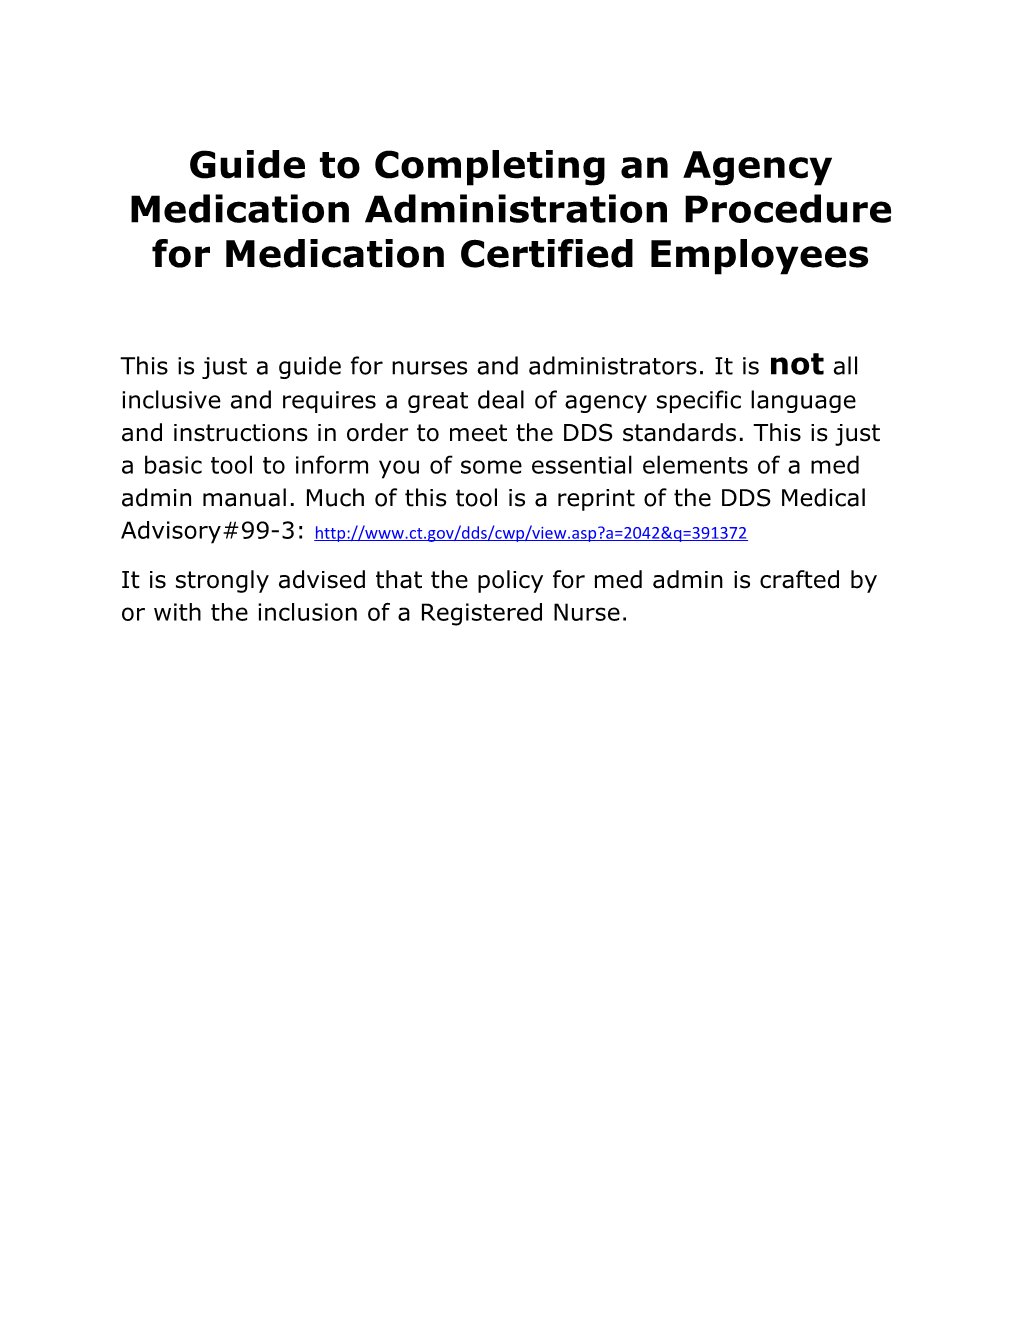 1. Qualification for Medication Administration